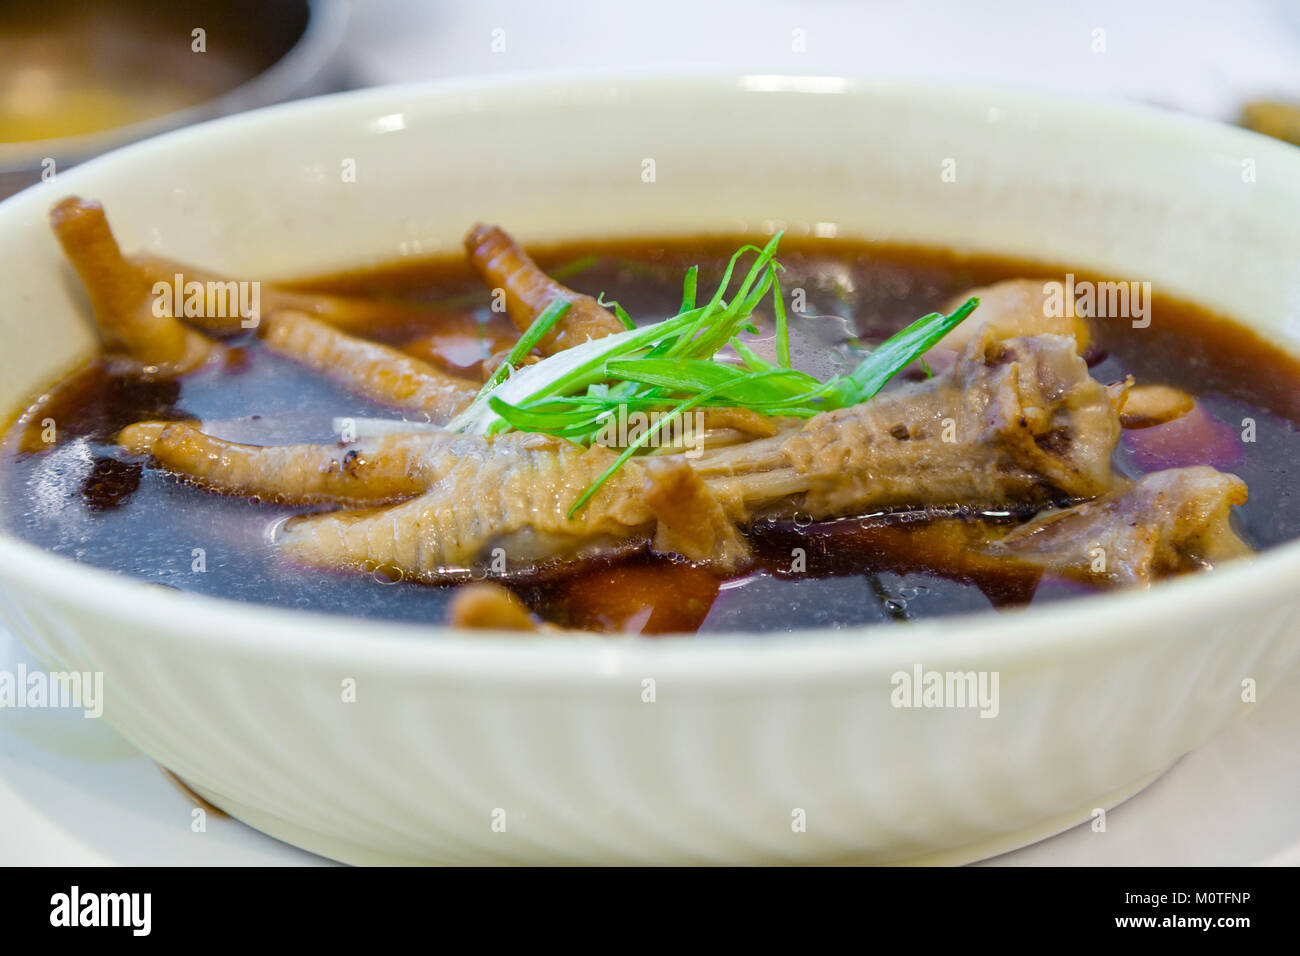 Braised chicken feet in soy sauce is a popular dim sum dish in Cantonese restaurants in Hong Kong. Stock Photo